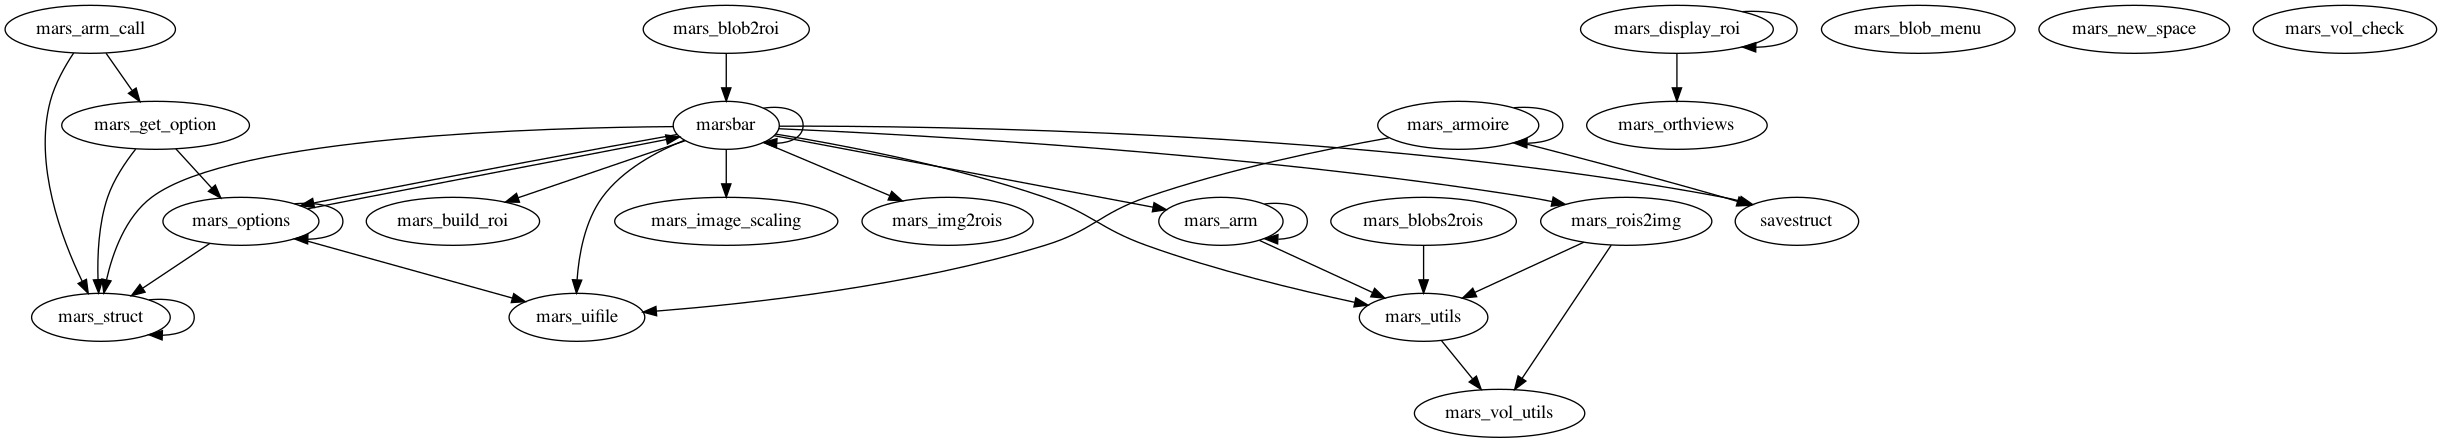 Dependency Graph for marsbar